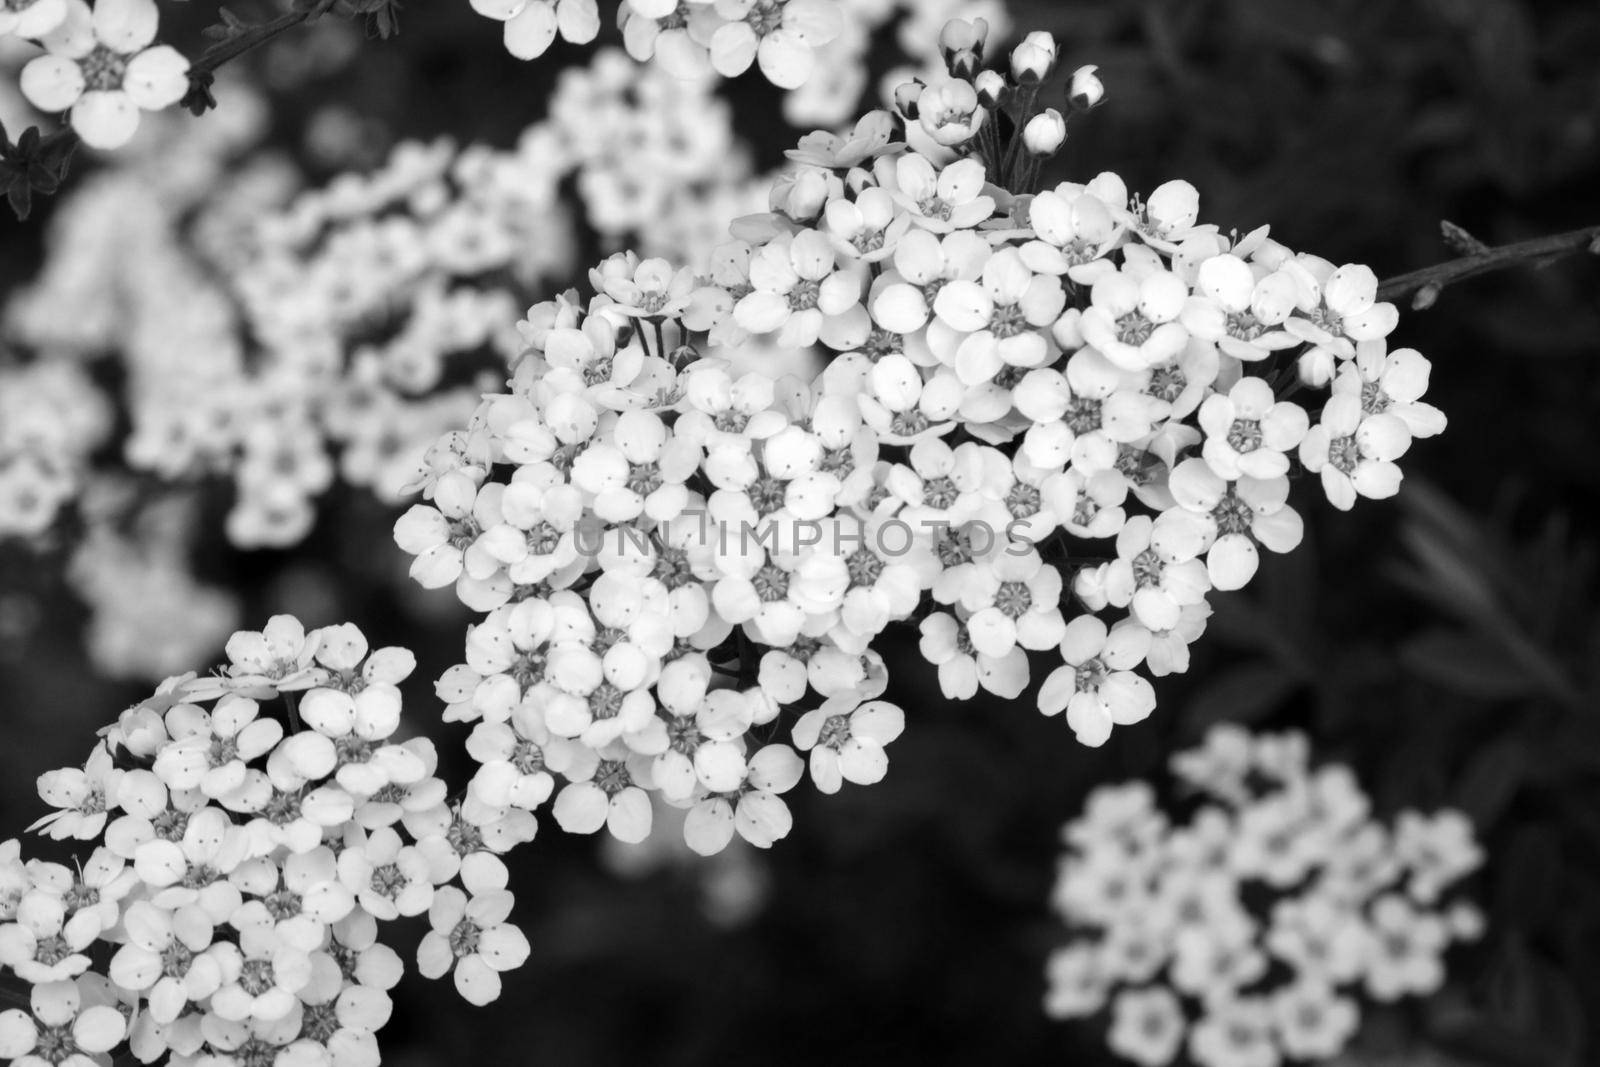 Black and white photo. Blooming useful wildflowers